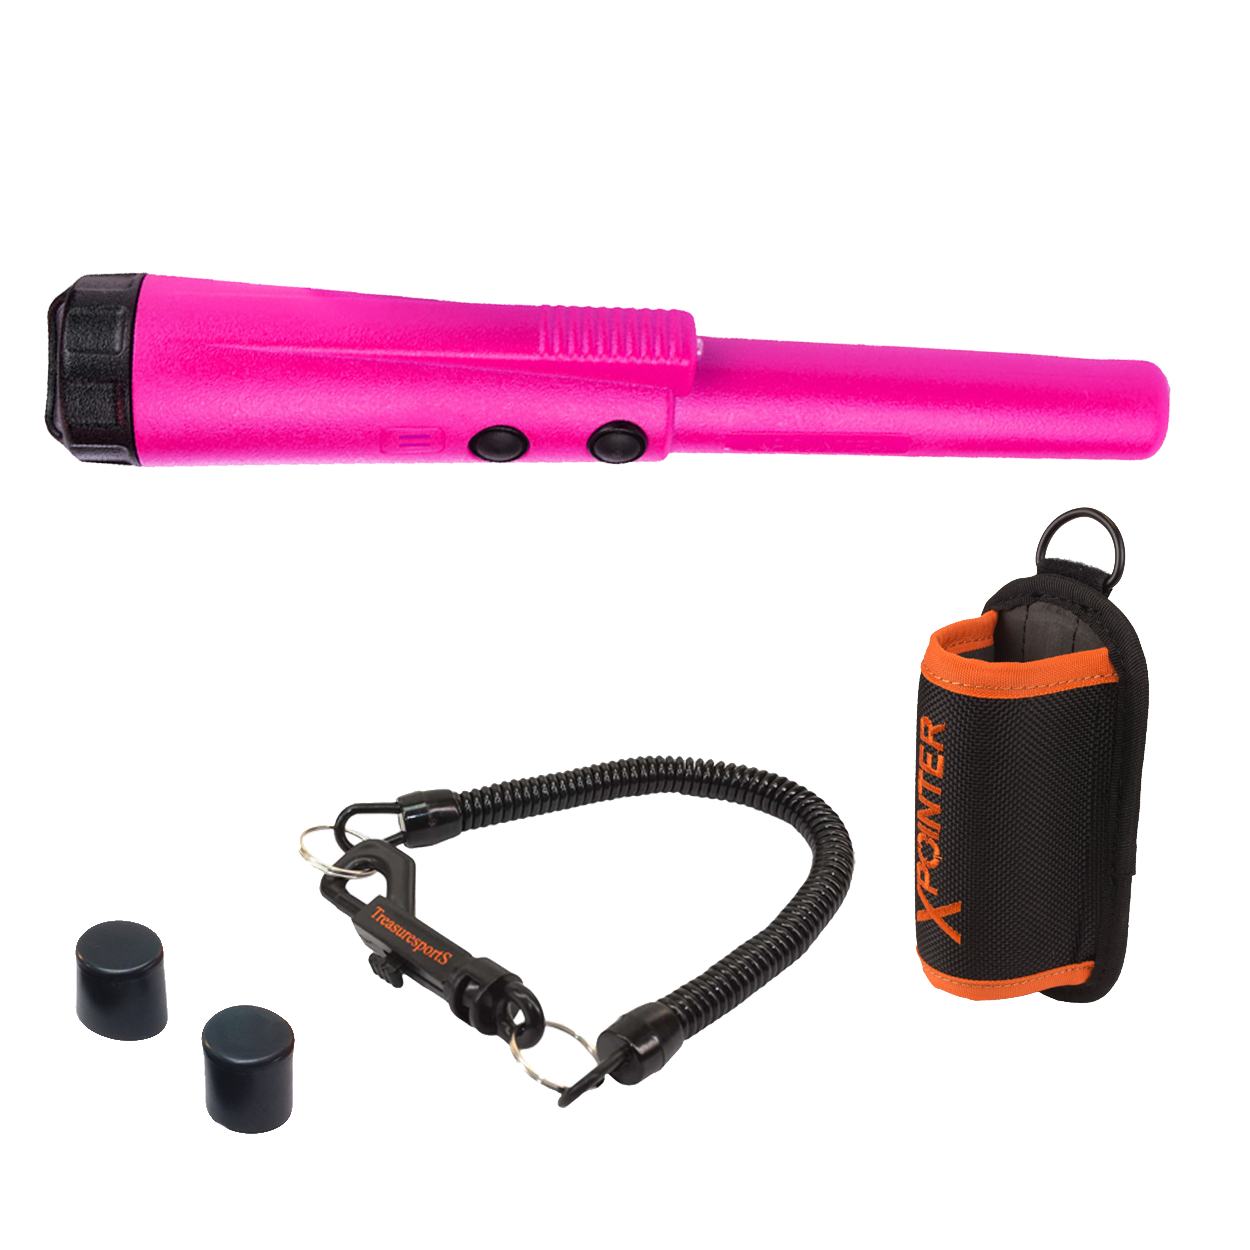 QUEST Metalldetektor XPointer Pink Pinpointer